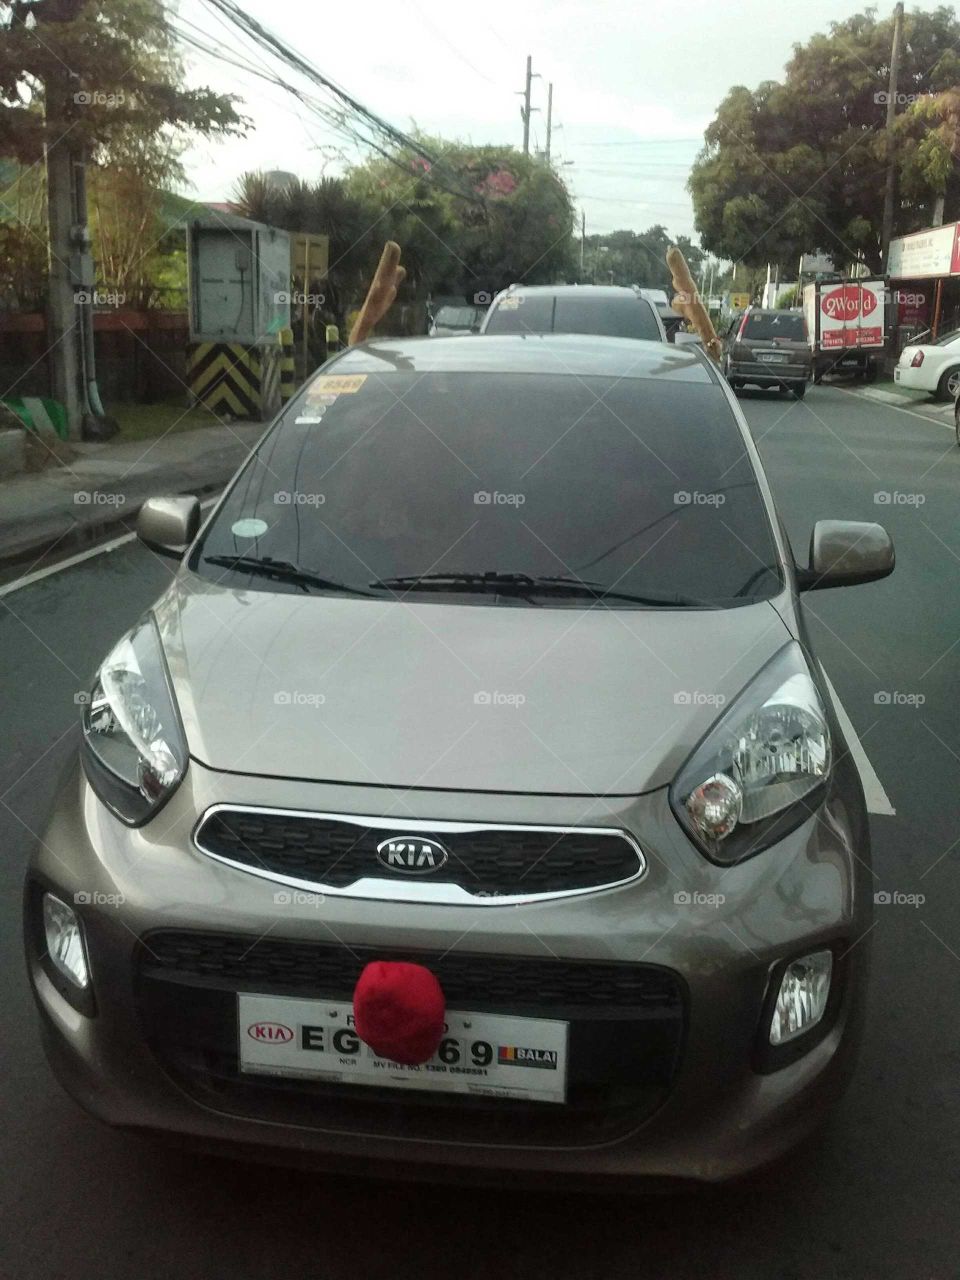 Rudolph the red nose car